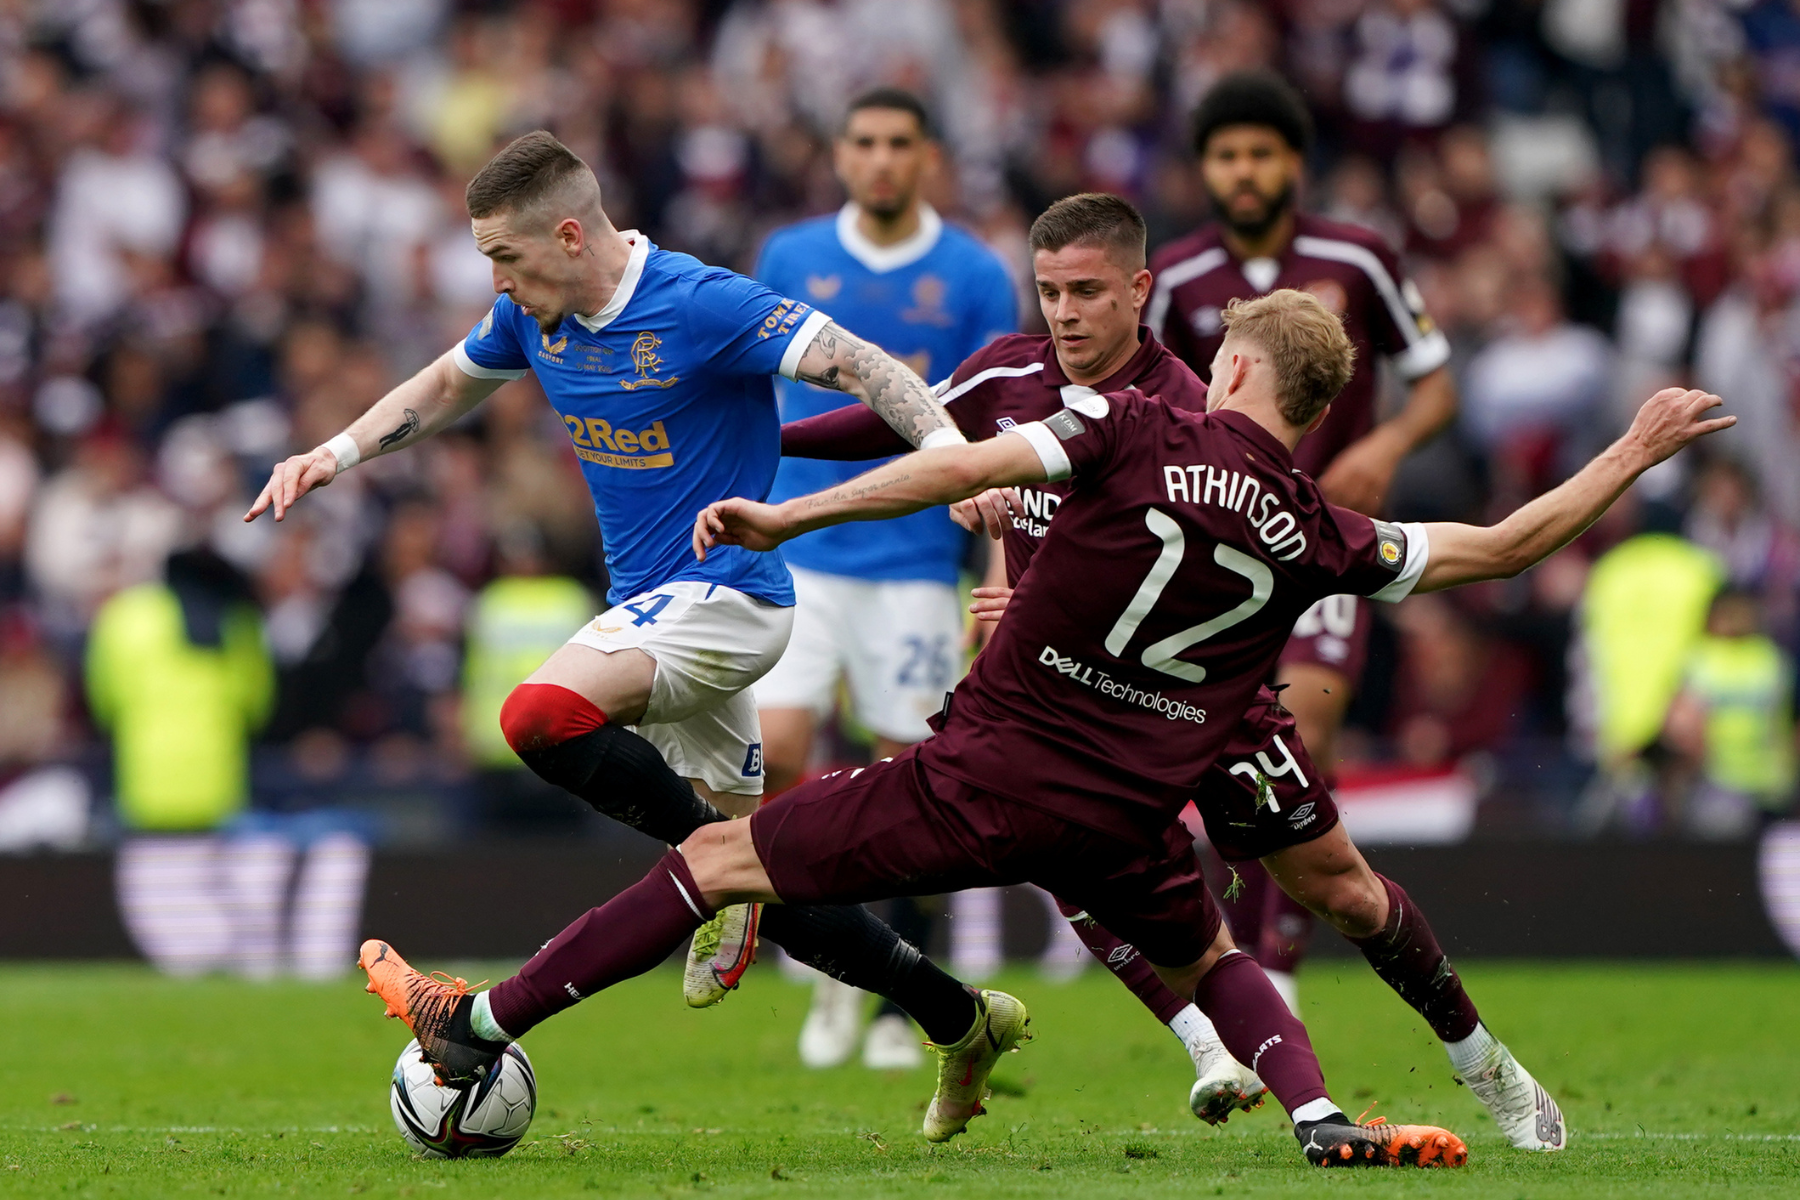 Hearts vs Rangers: TV channel, live stream and kick-off time